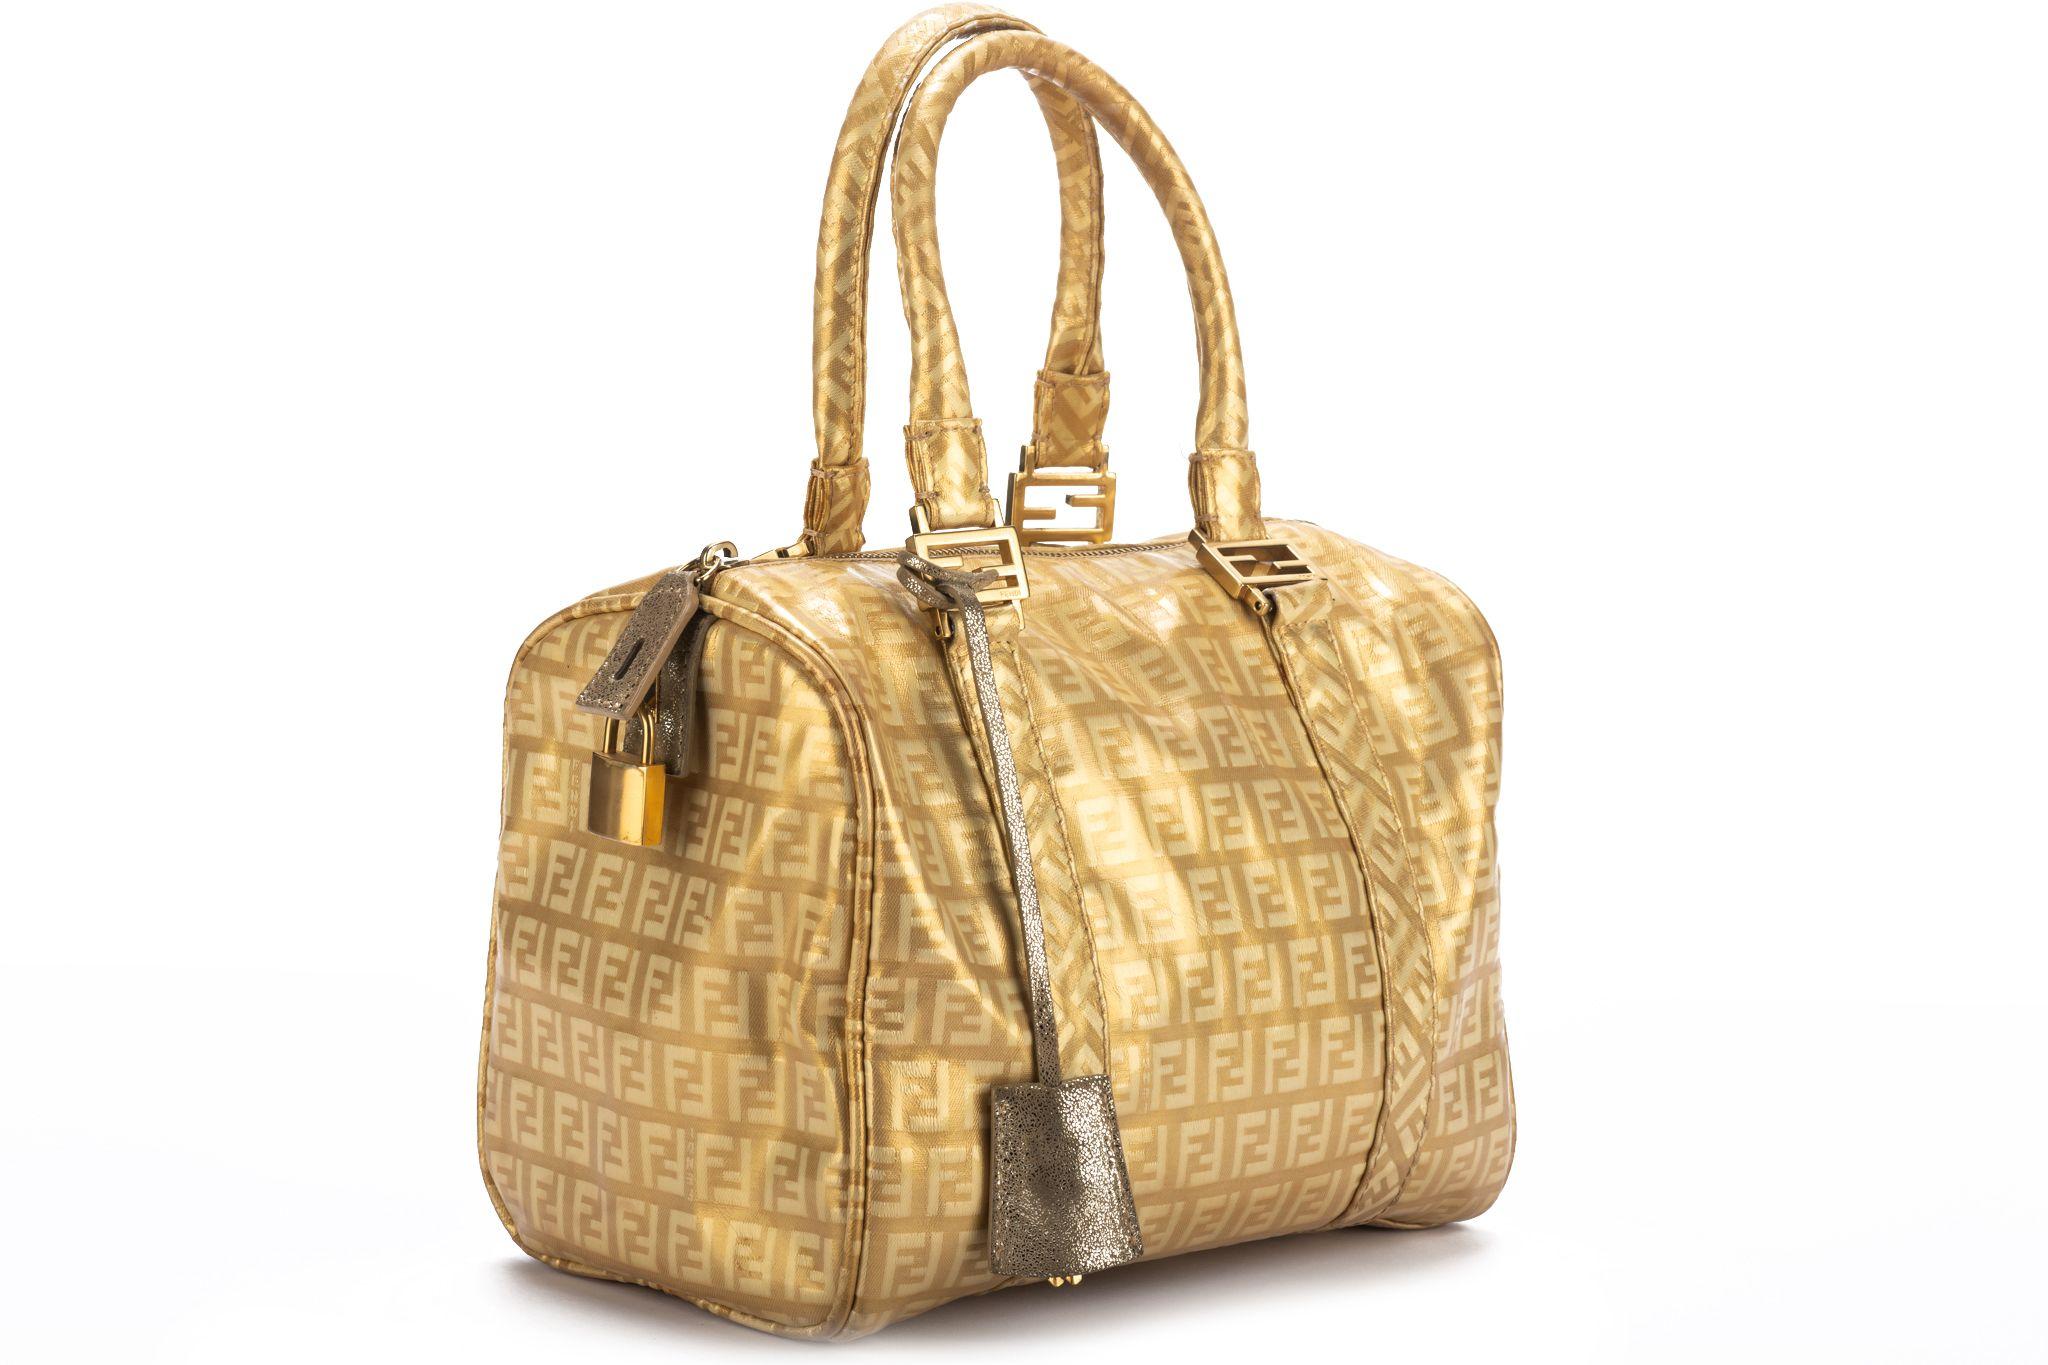 Fendi gold zucchino mini speedy bag in gold . excellent condition, comes with generic dust cover.